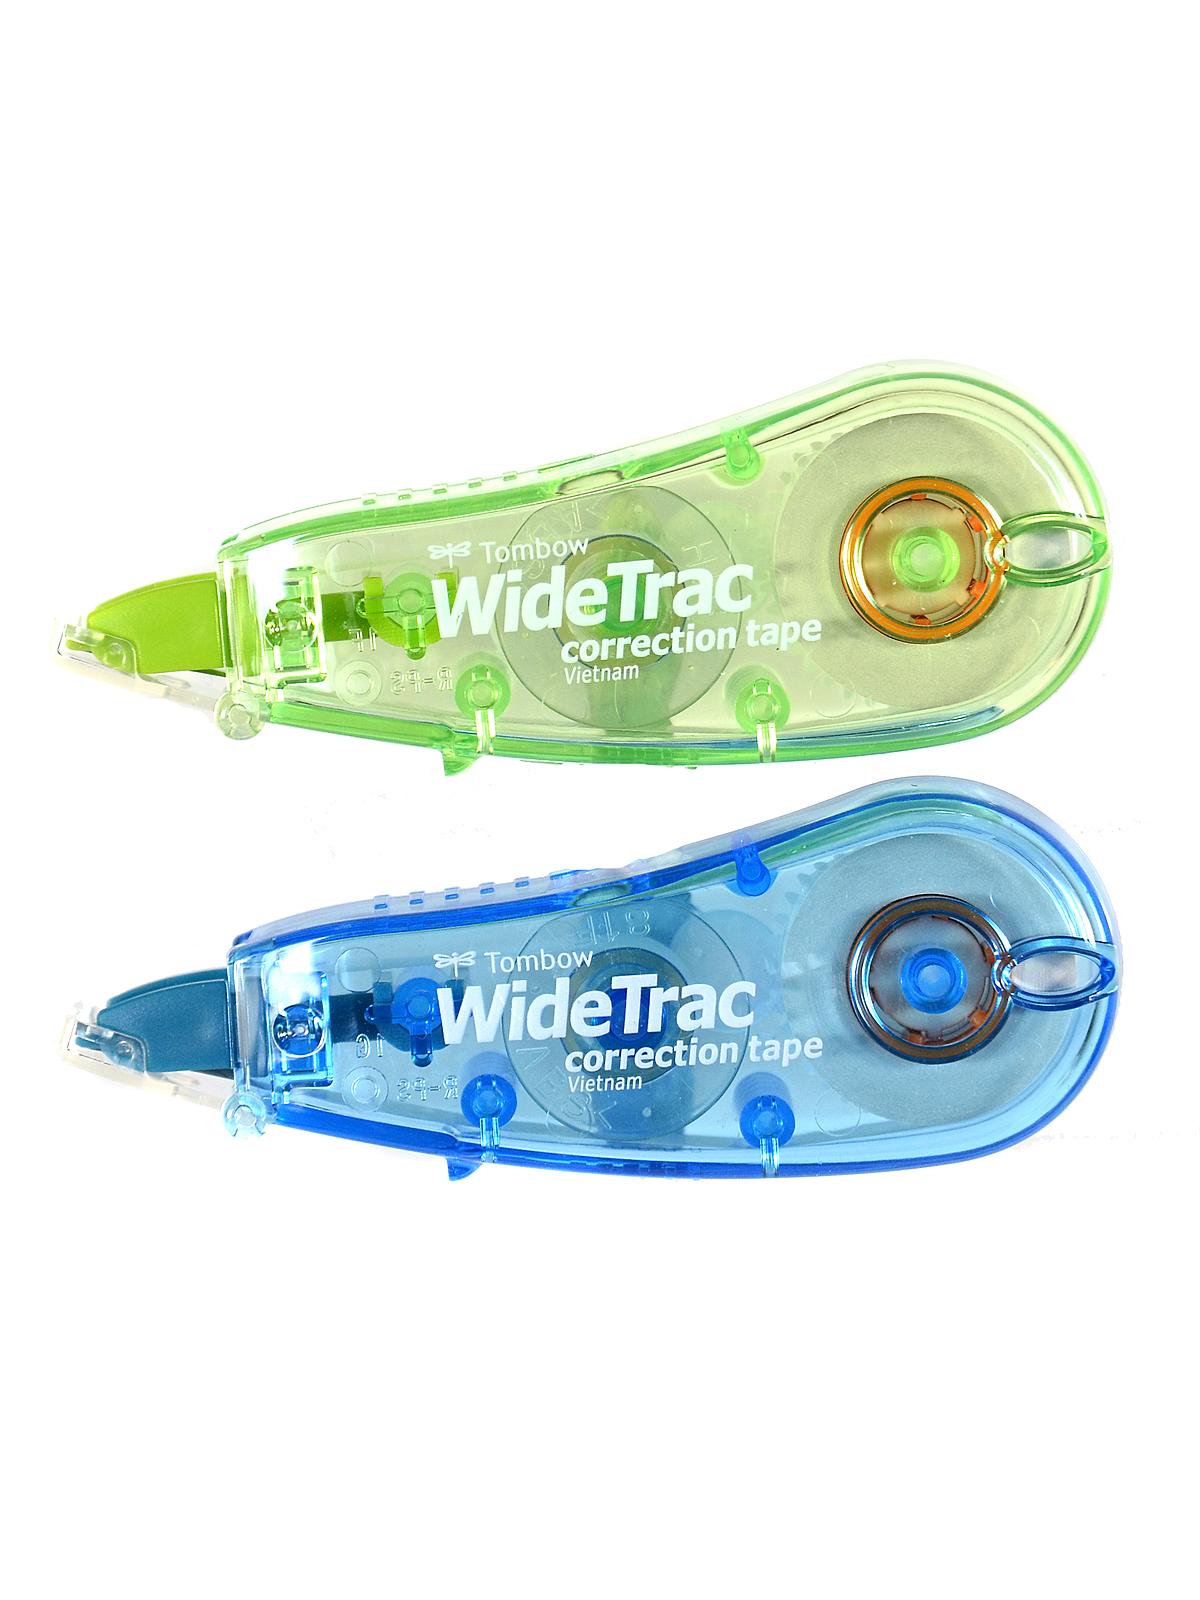 Widetrac Correction Tape 1 3 In. X 236 In. Pack Of 2